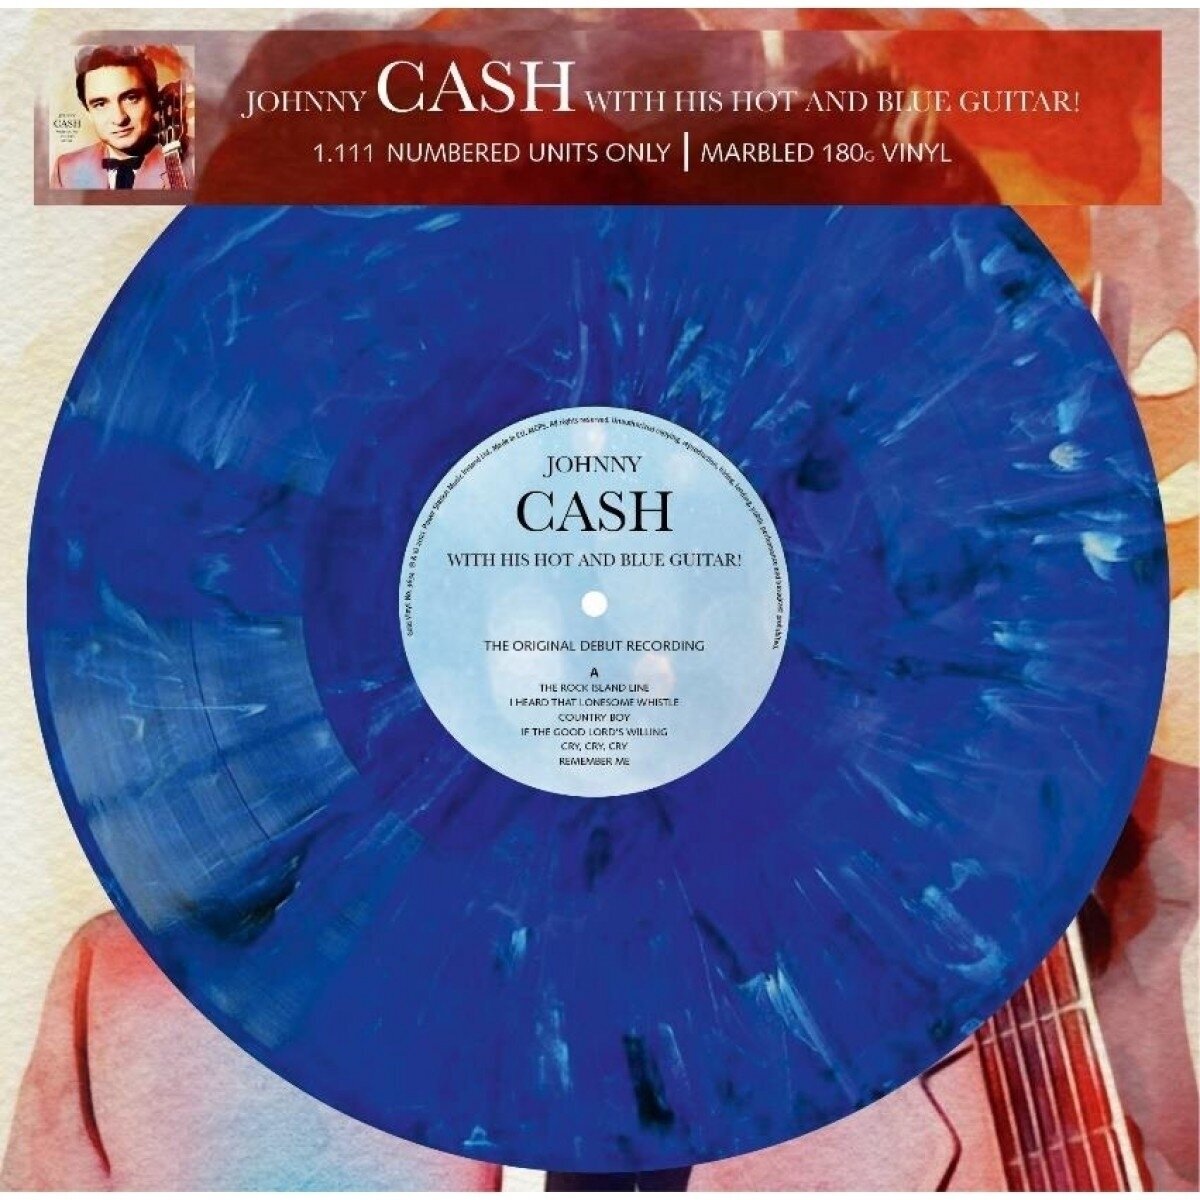 Hanglemez Johnny Cash - With His Hot And Blue Guitar (Limited Edition) (Reissue) (Blue Marbled Coloured) (LP)